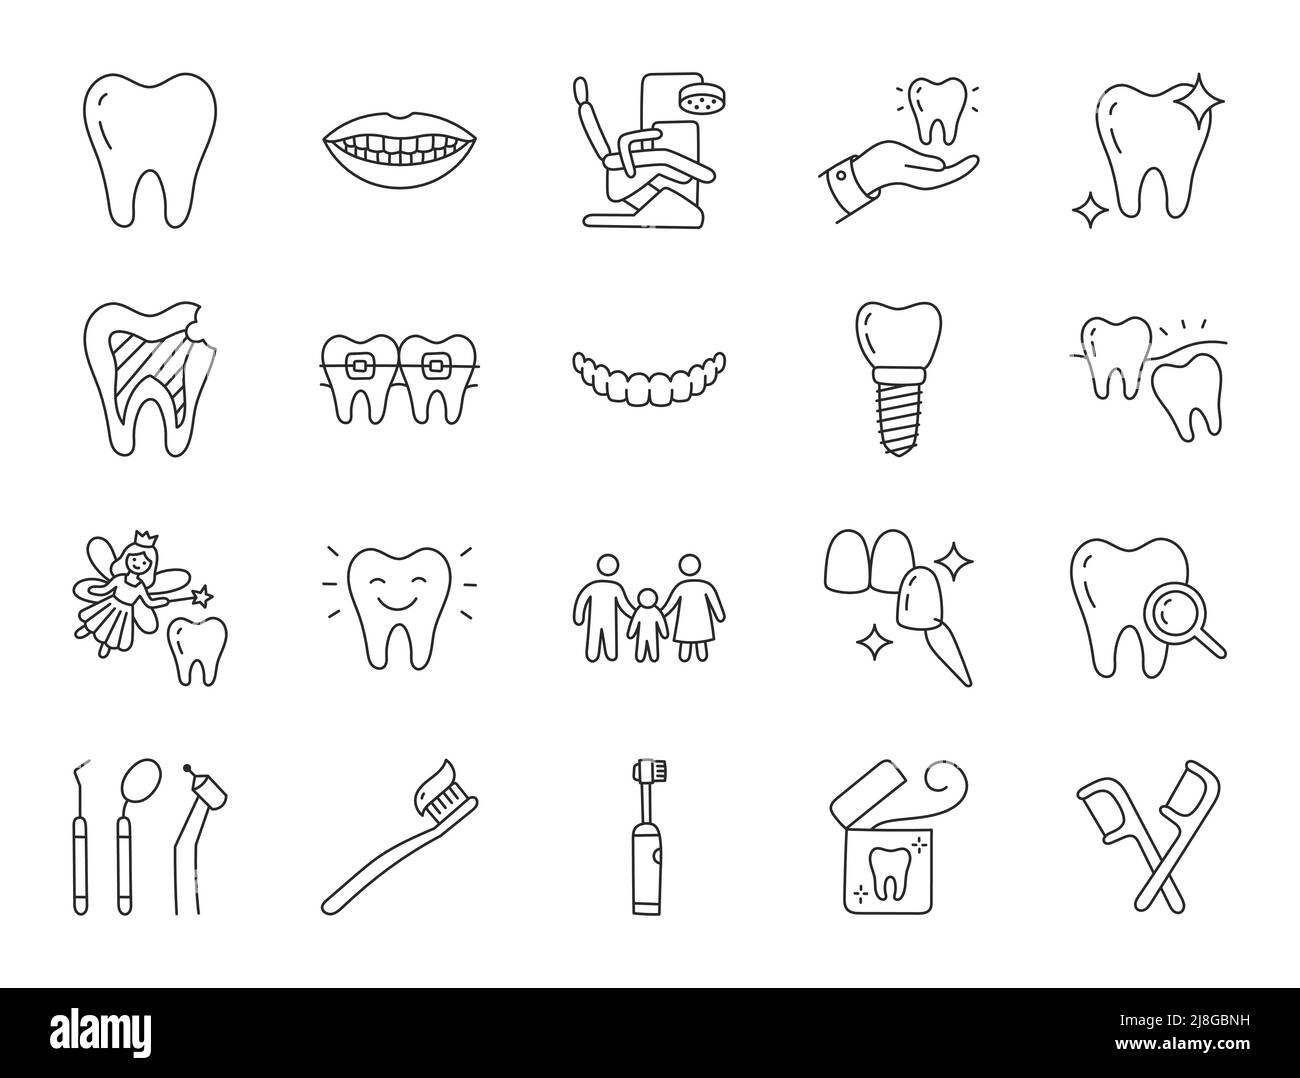 Dental clinic doodle illustration including icons - wisdom tooth, veneer, teeth whitening, braces, implant, electric toothbrush, caries, floss, mouth Stock Vector